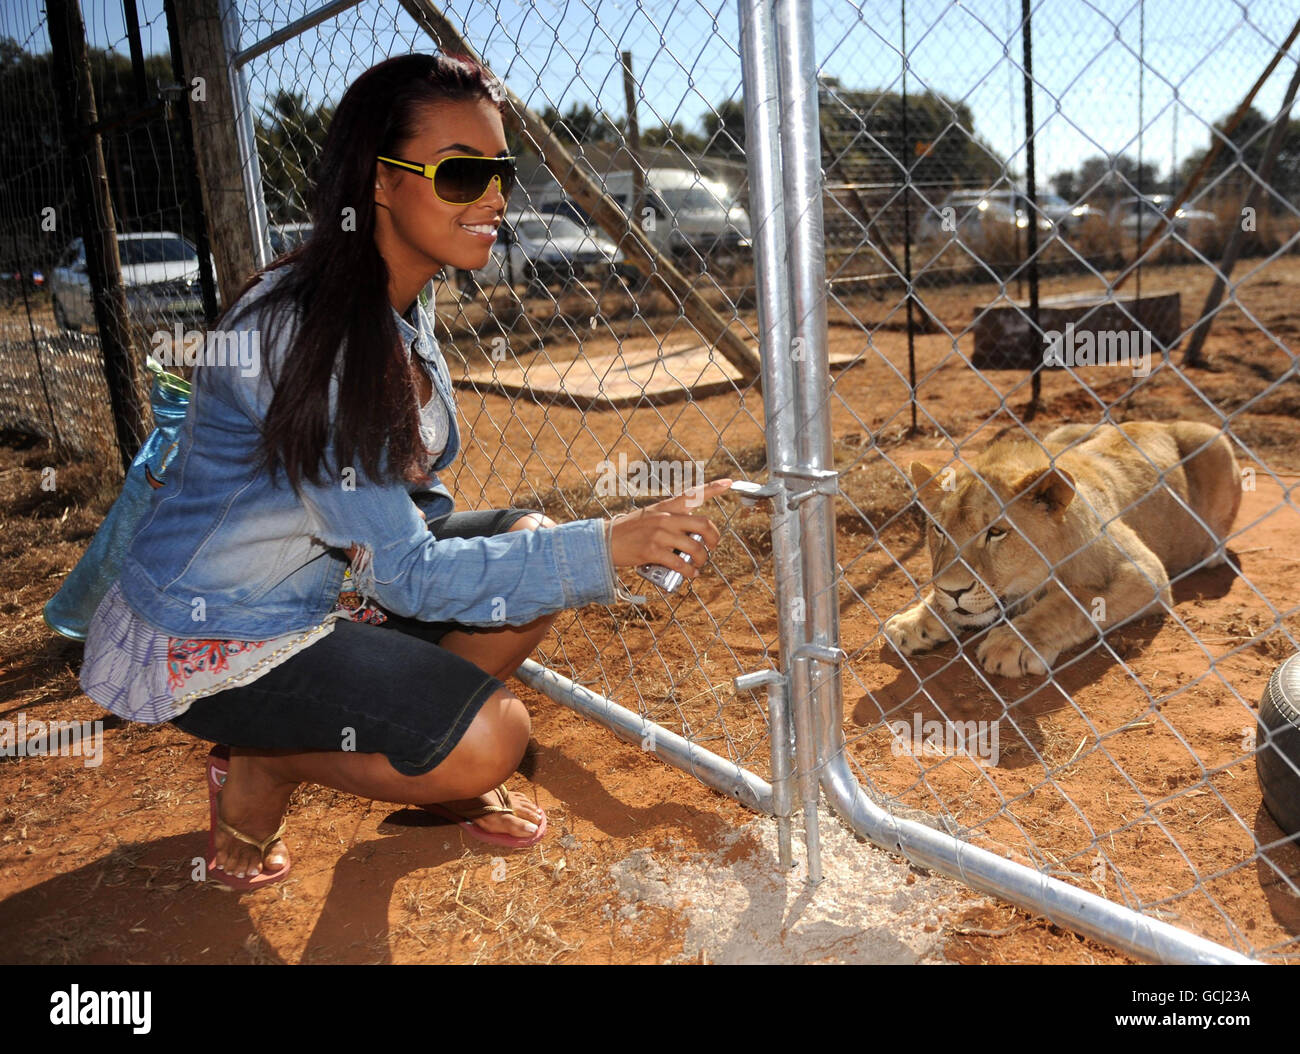 Chantelle Tagoe (partner of Emile Heskey) poses with a lion during a visit to the Cheetah Experience in Bloemfontein, South Africa. Stock Photo